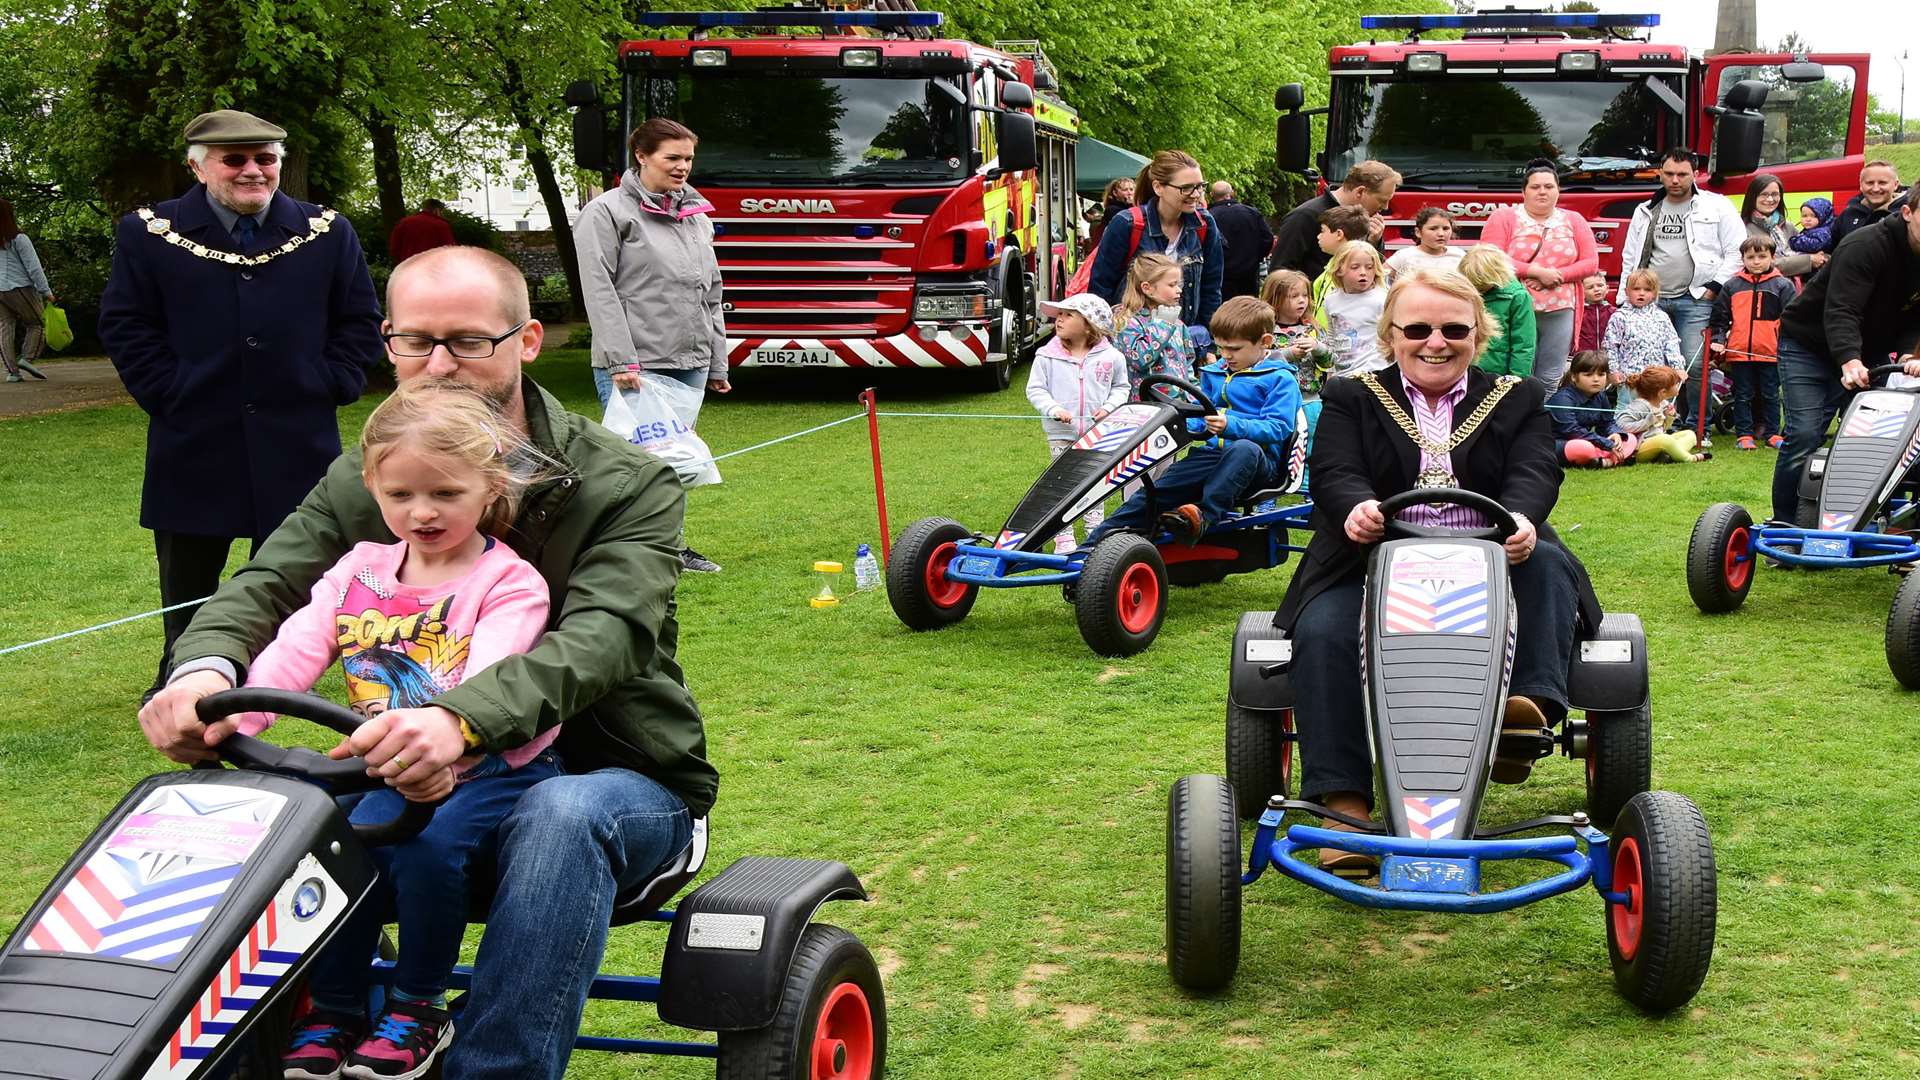 The Lord Mayor of Canterbury Cllr Sally Waters joining in with the Pedal Go-Karting fun at Buster’s Big Bash 2016 staged at Dane John Gardens, Canterbury on Saturday, May 14.